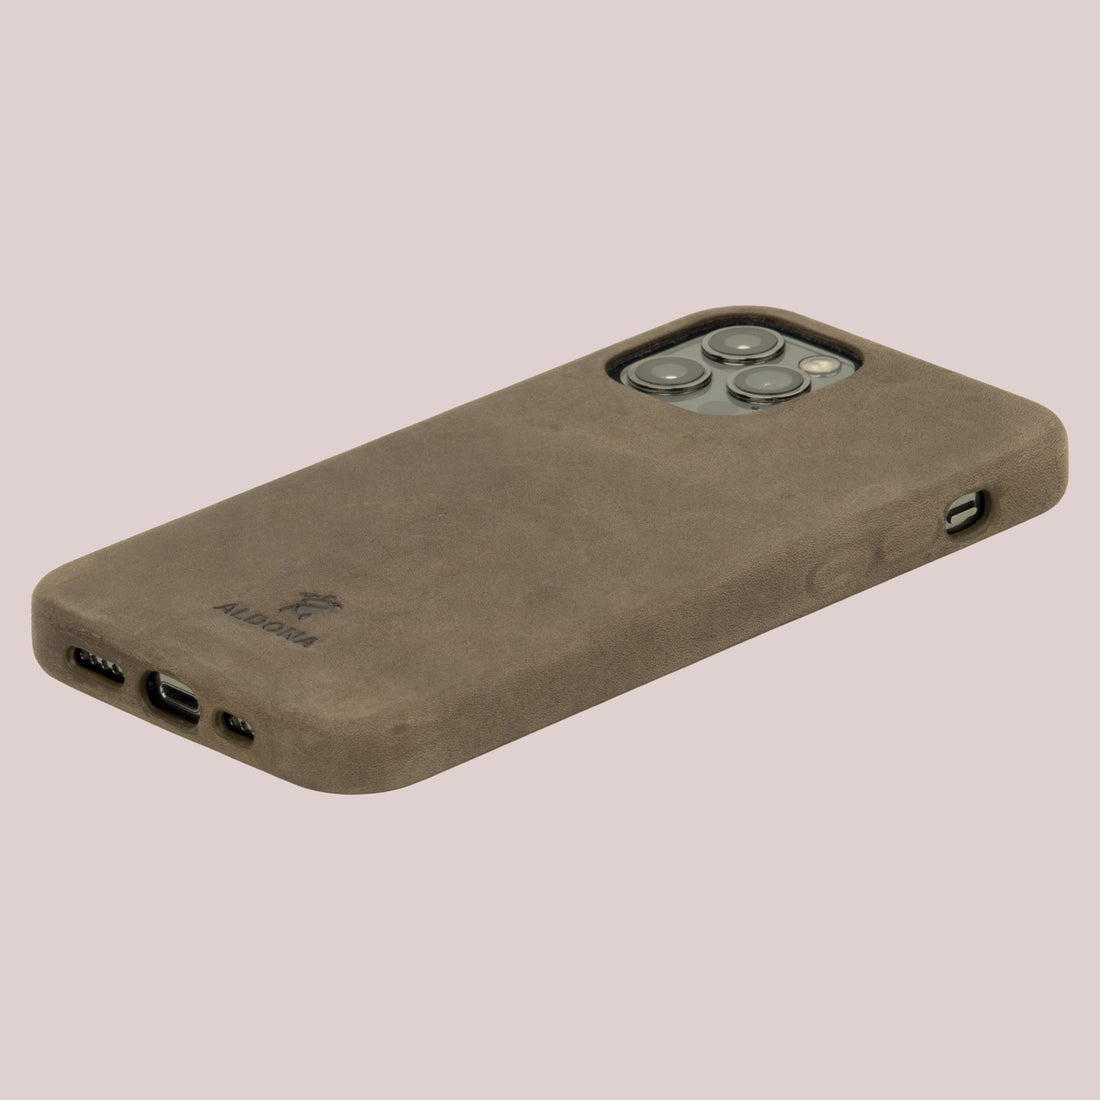 Kalon Case for iPhone 14 Pro Max with MagSafe Compatibility - Vintage Tan